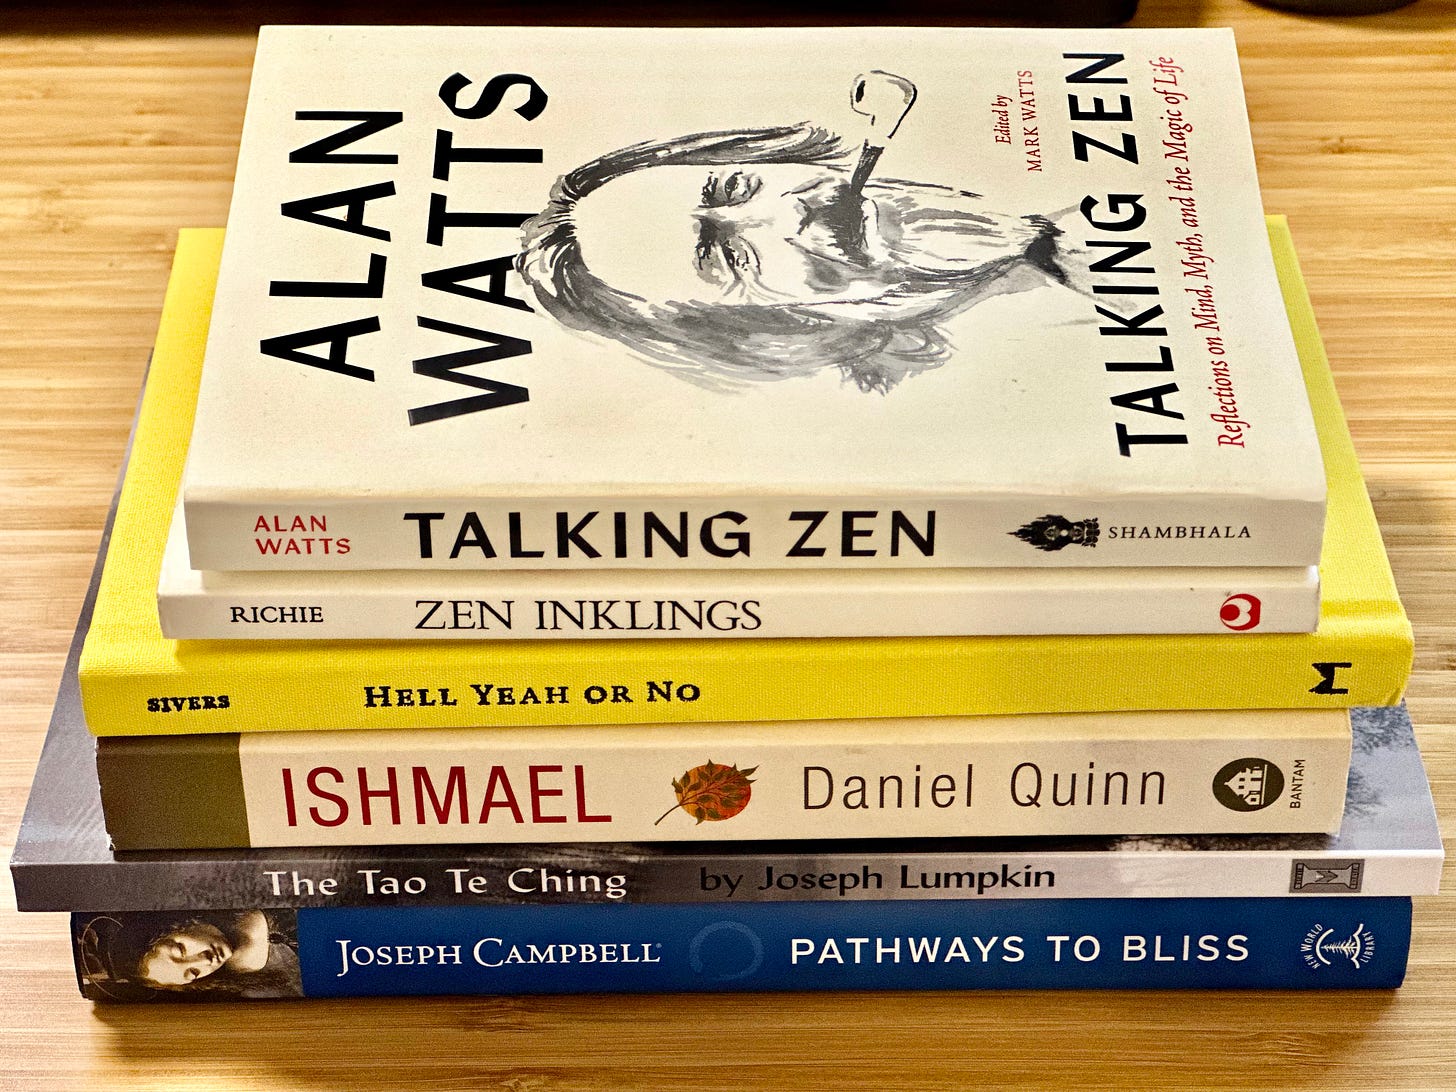 Top to bottom: Talking Zen by Alan Watts, Zen Inklings by Donald Richie, Hell Yeah or No by Derek Sivers, Ishmael by Daniel Quinn, Tao te Ching by Lao Tzu (Translated by Joseph Lumpkin), and Pathways to Bliss by Joseph Campbell